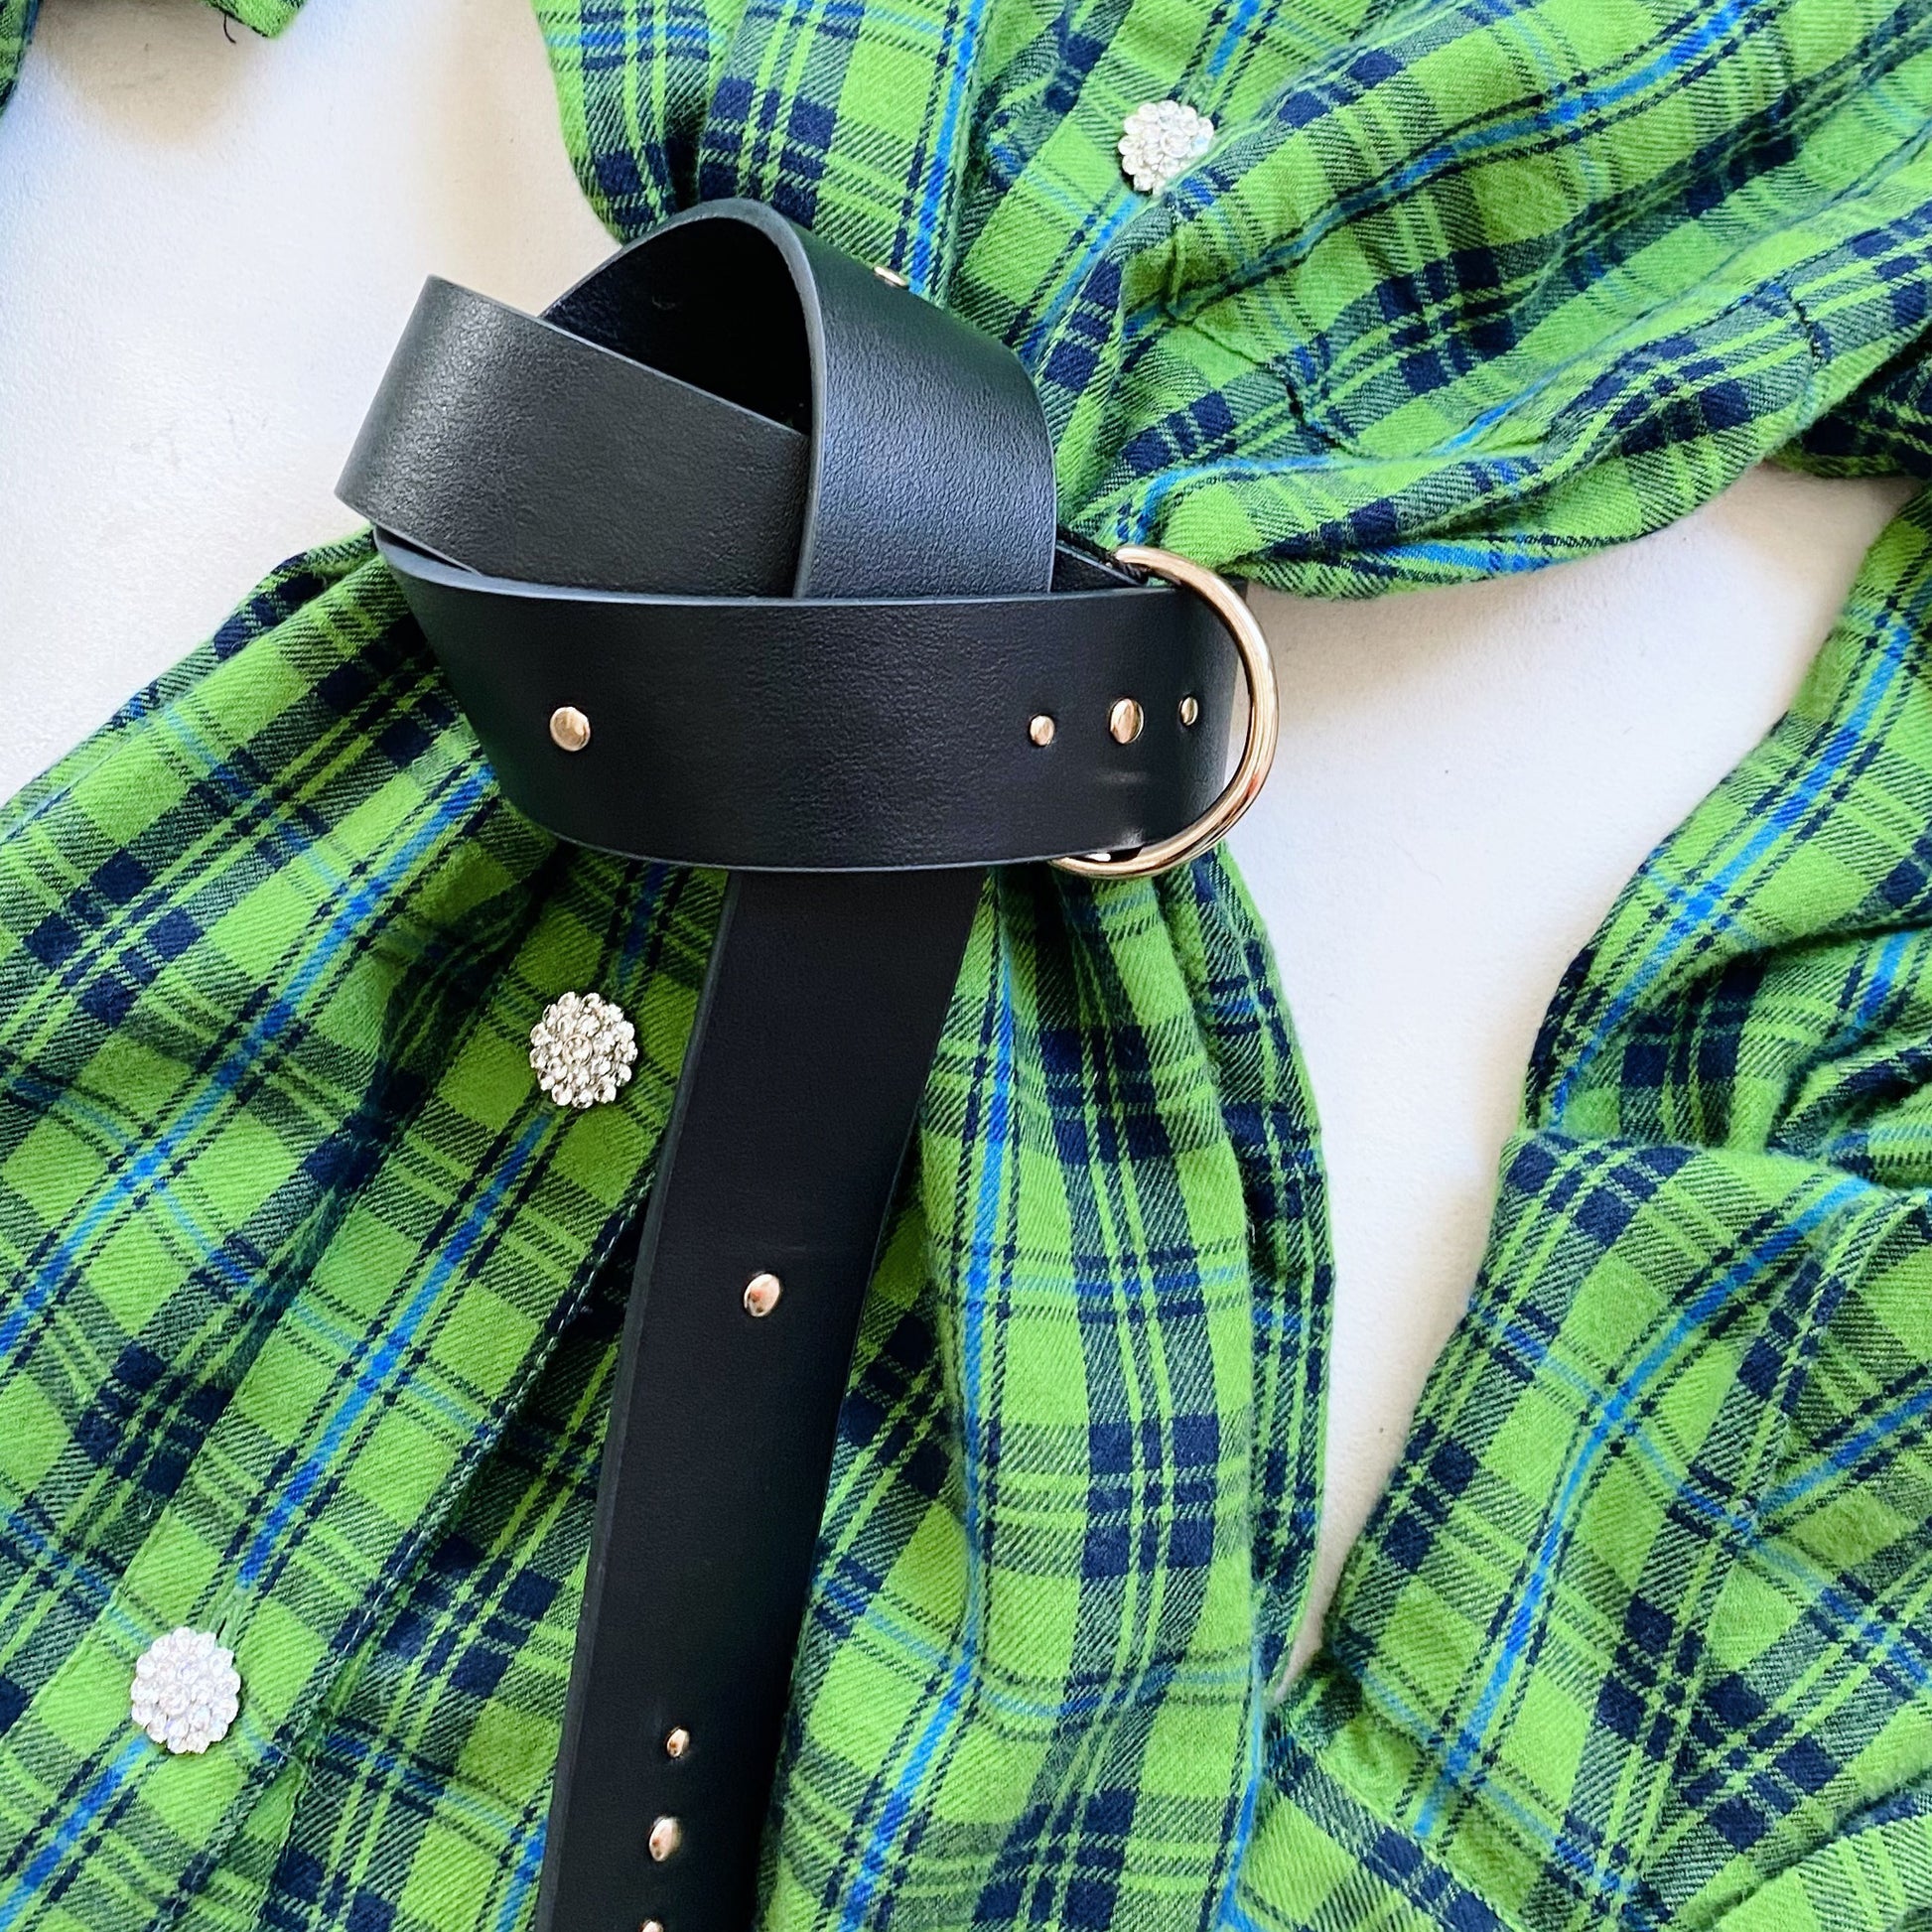 A self-tie green and black plaid shirt with a Fabienne Chapot Studded Belt - Black.